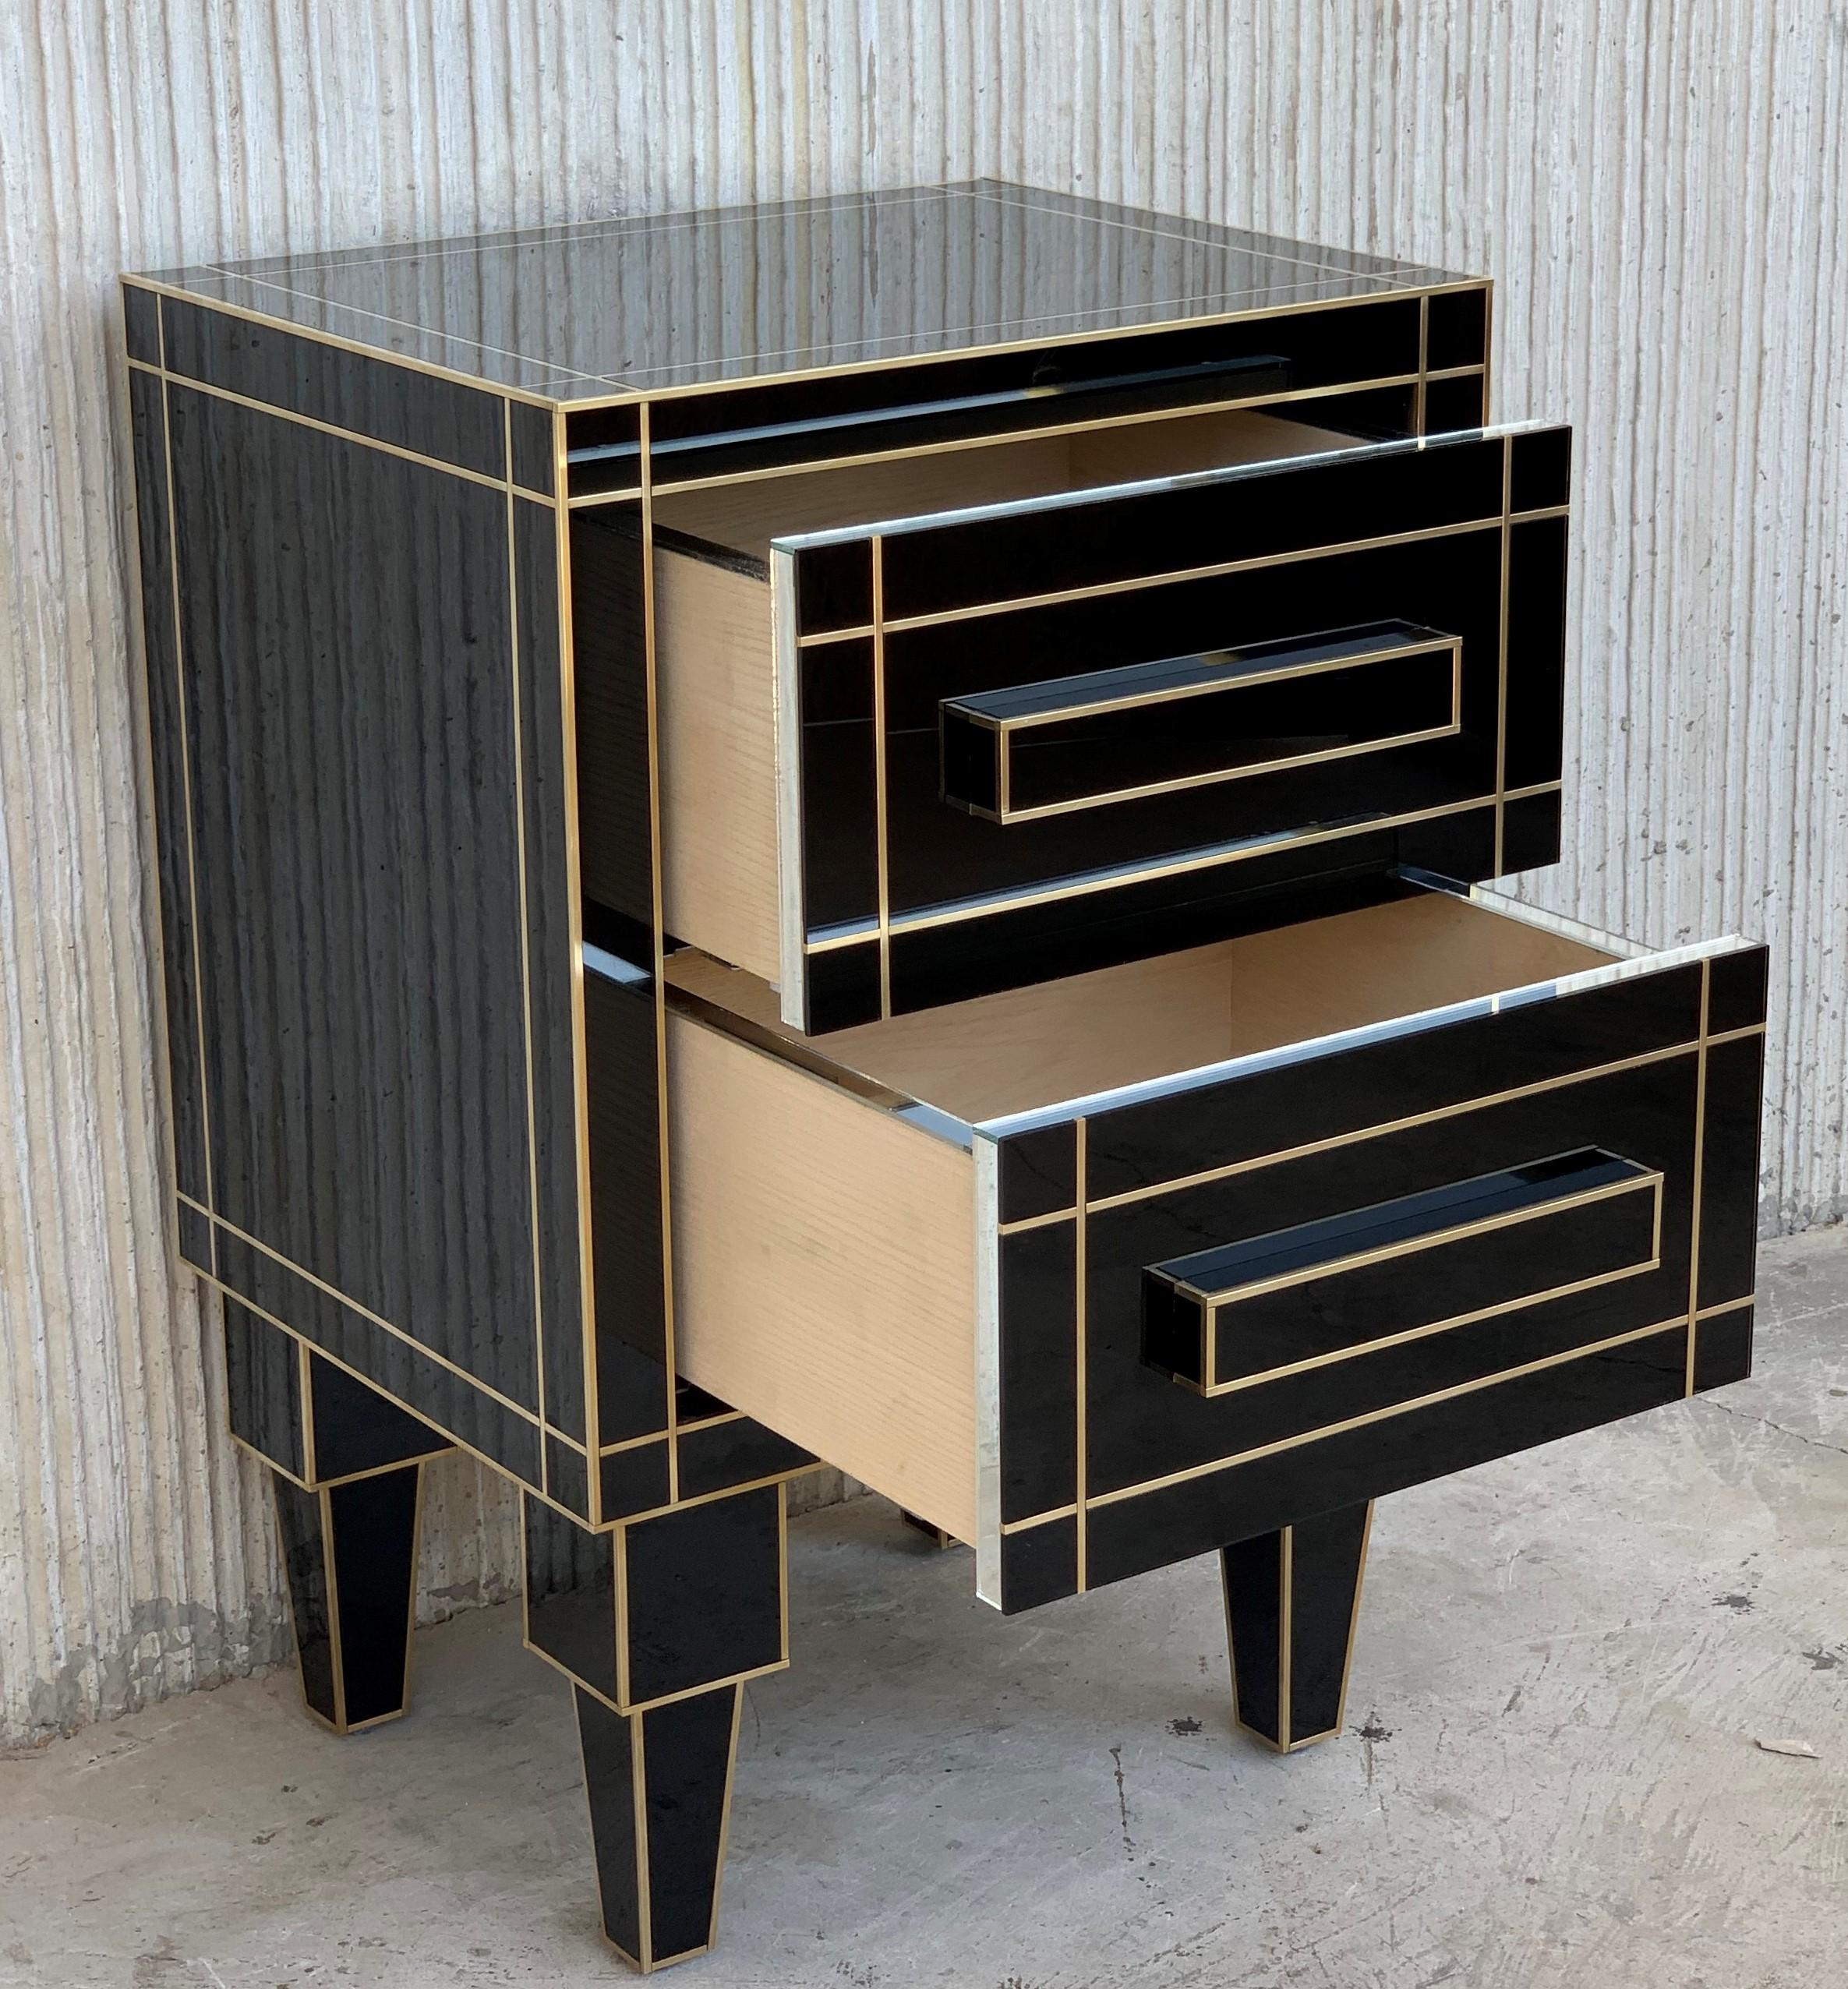 Contemporary New Pair of Mirrored Nightstands in Black Mirror with Two Drawers